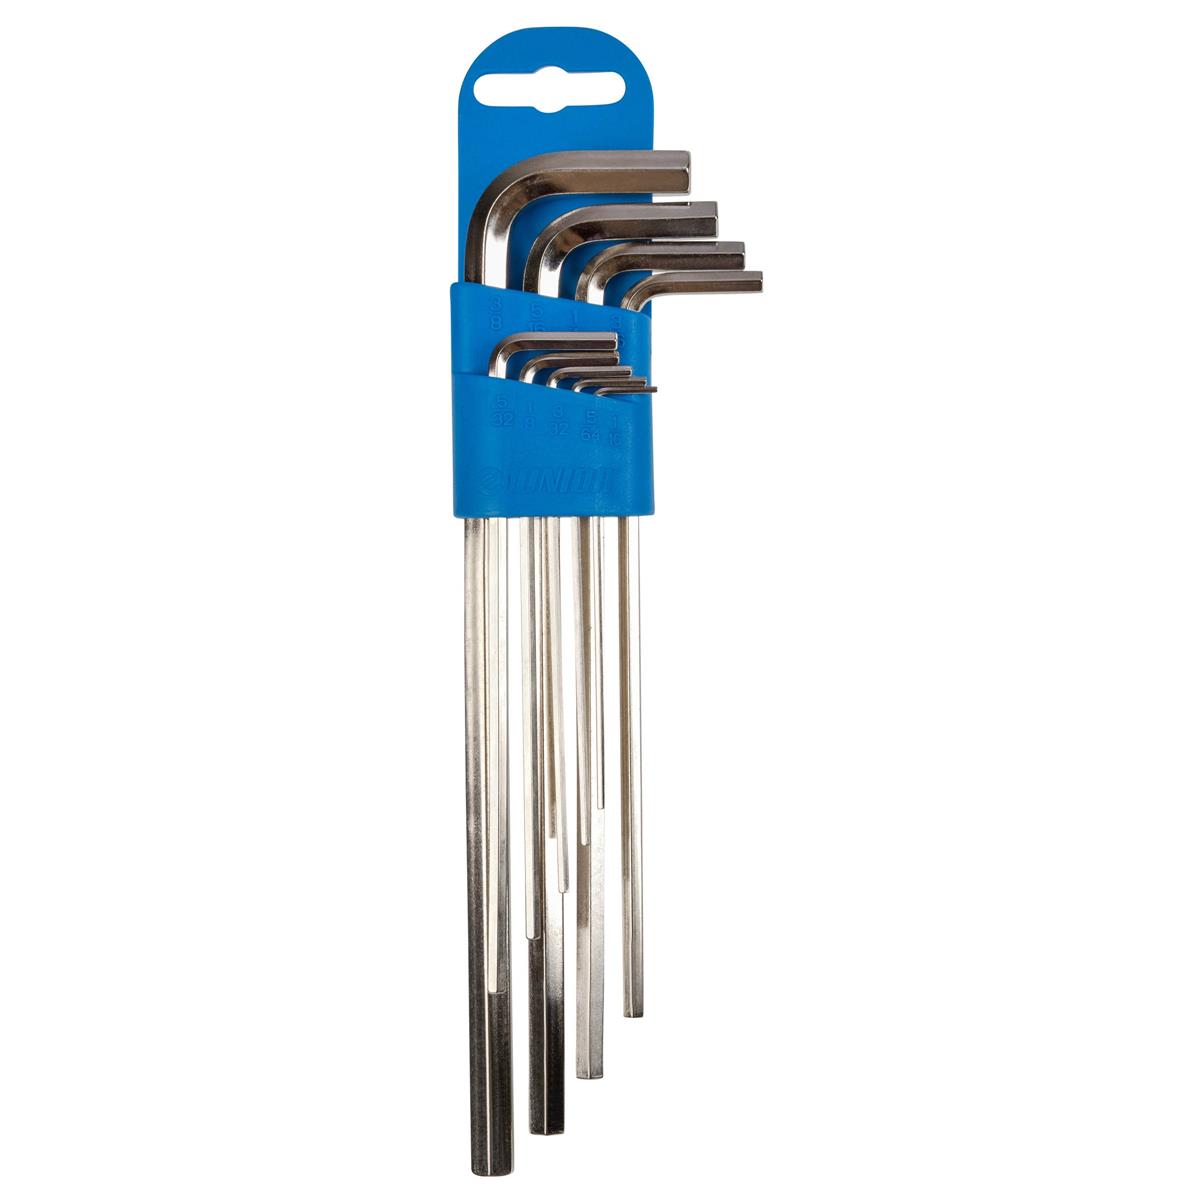 Bahco 900T-313-TH Tools at Height T-Handle Hex Keys 20.5/16 20.5/16 JH Williams Tool Group 